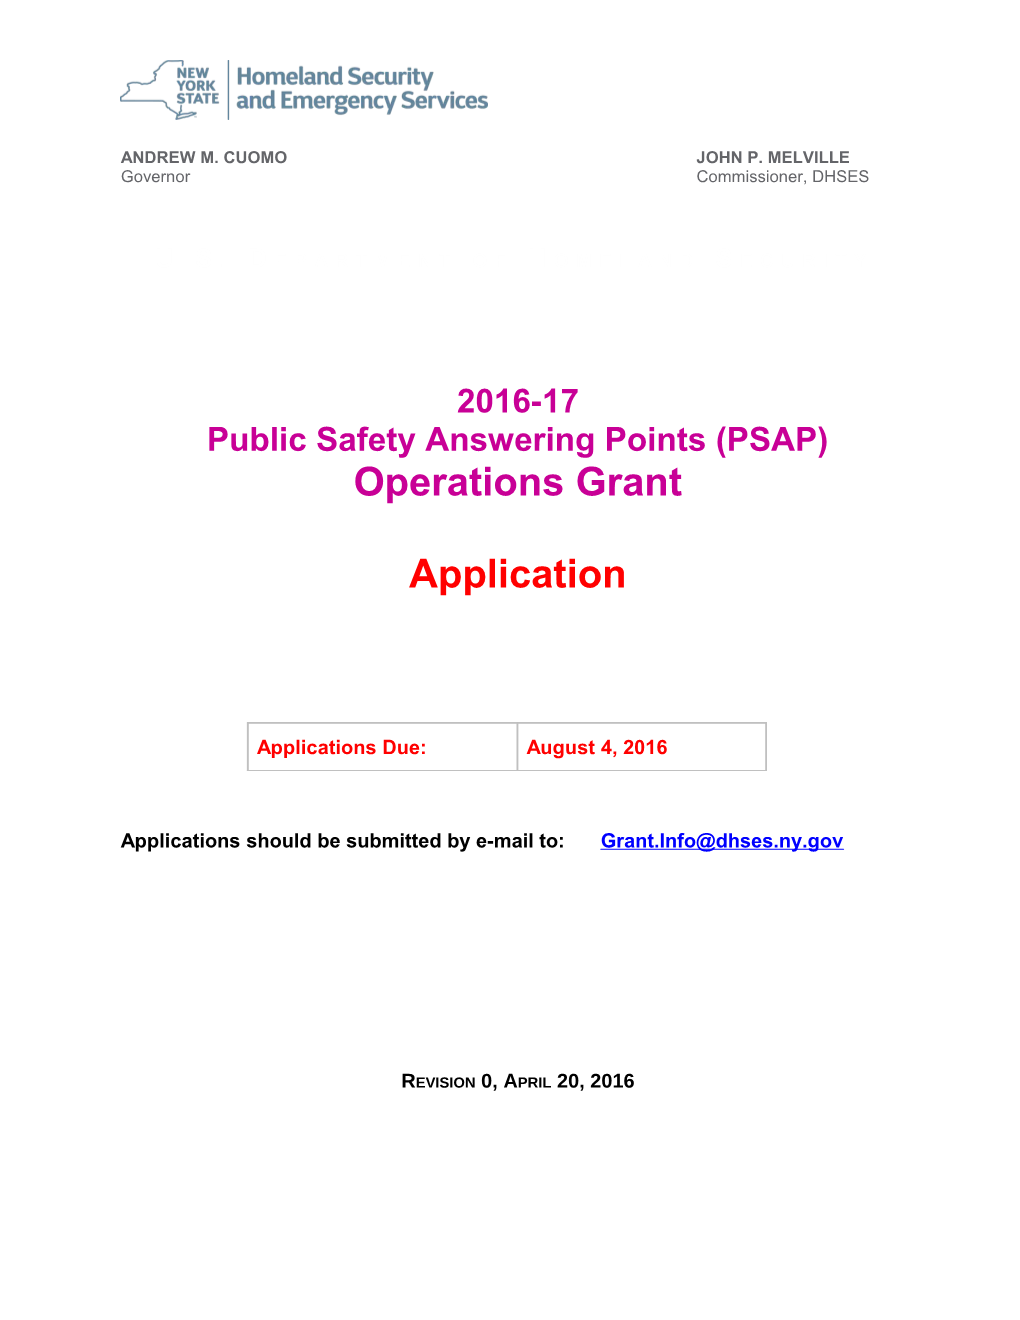 Public Safety Answering Points (PSAP) Operations Grant